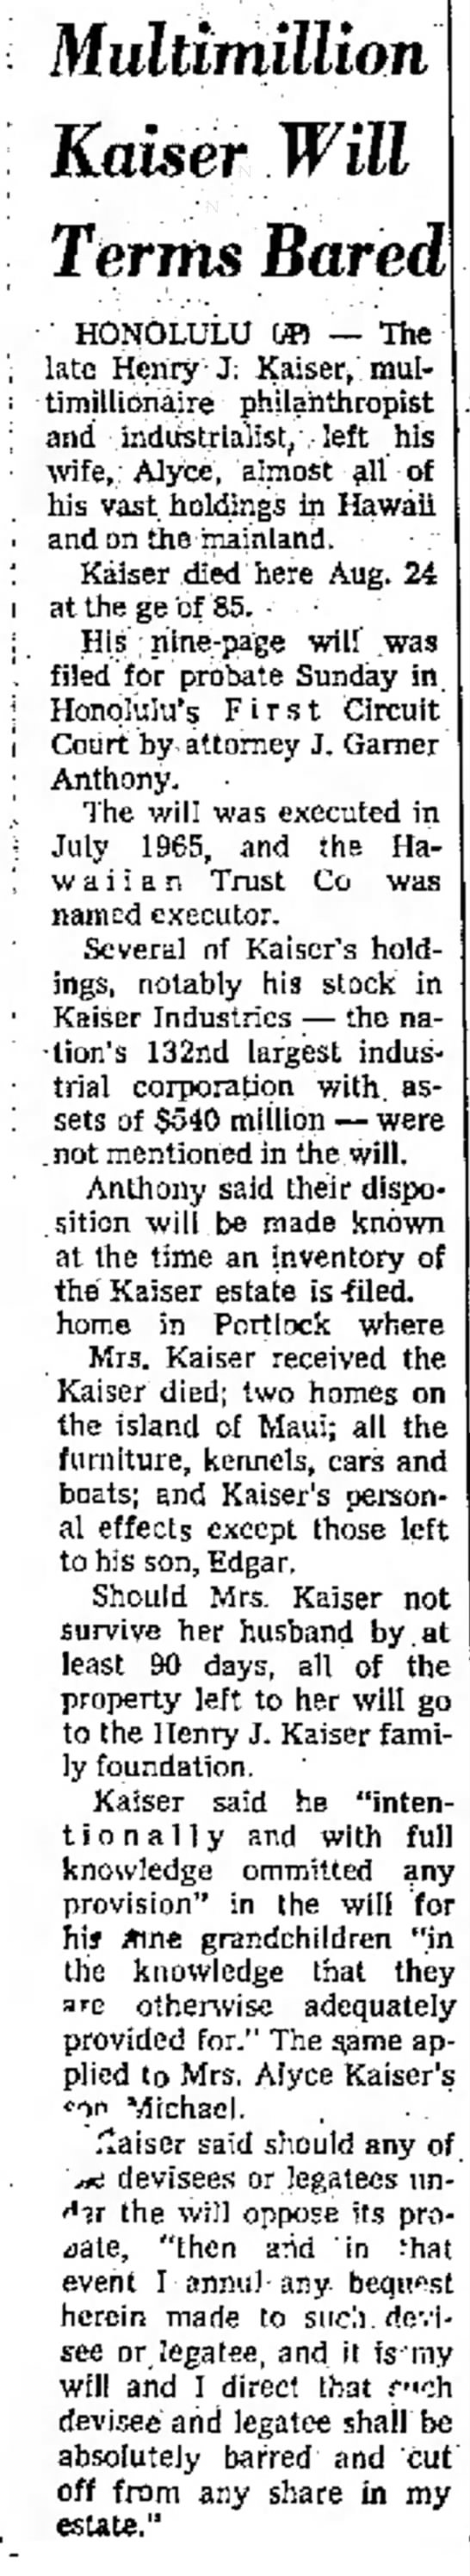 Alyce Chester Kaiser will from husband Henry J Kaiser after his death - 